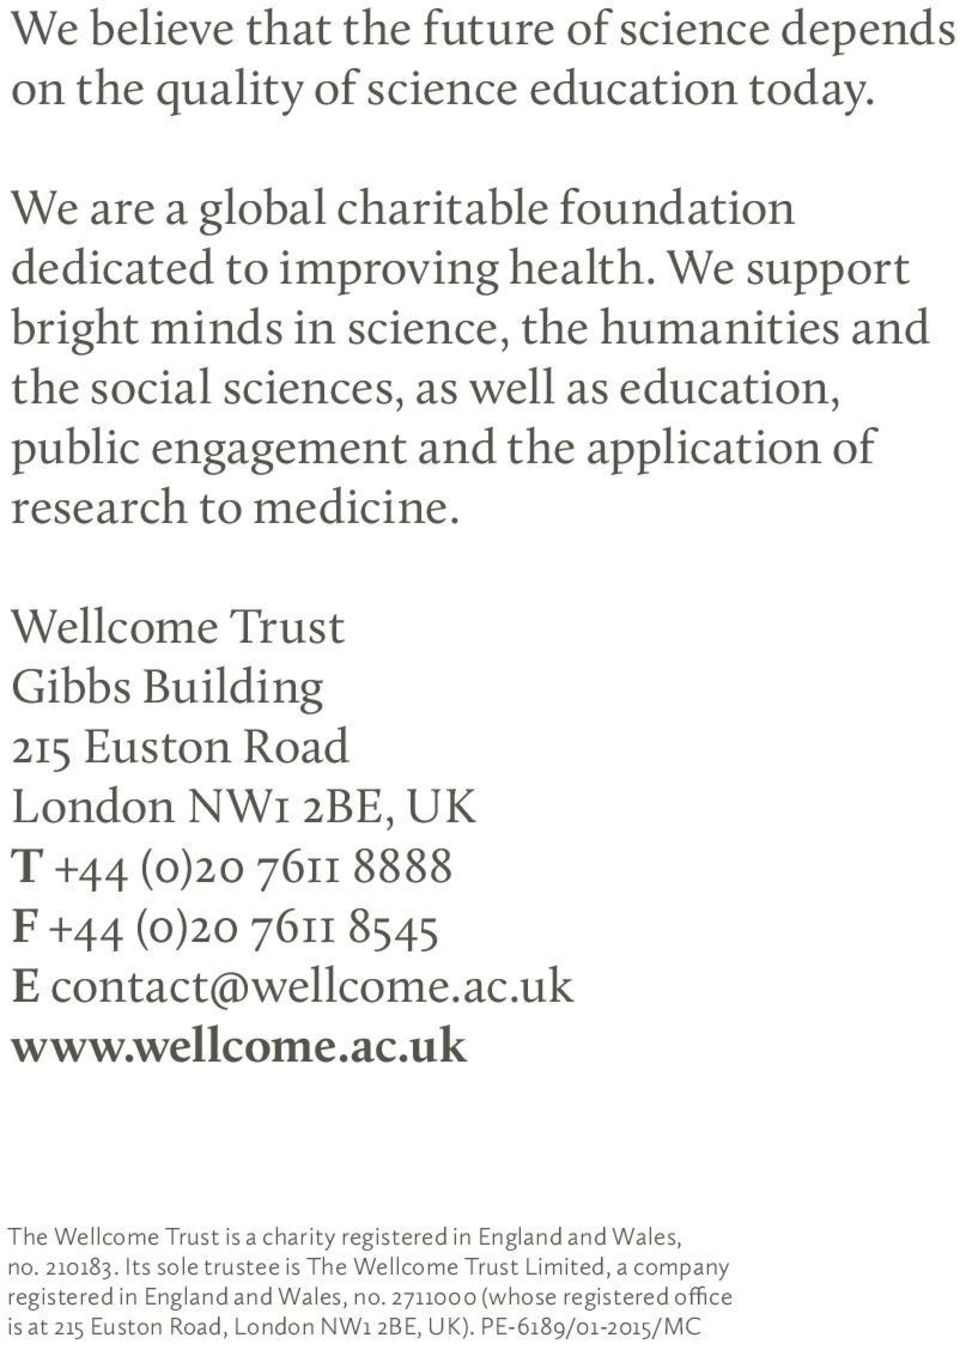 Wellcome Trust Gibbs Building 215 Euston Road London NW1 2BE, UK T +44 (0)20 7611 8888 F +44 (0)20 7611 8545 E contact